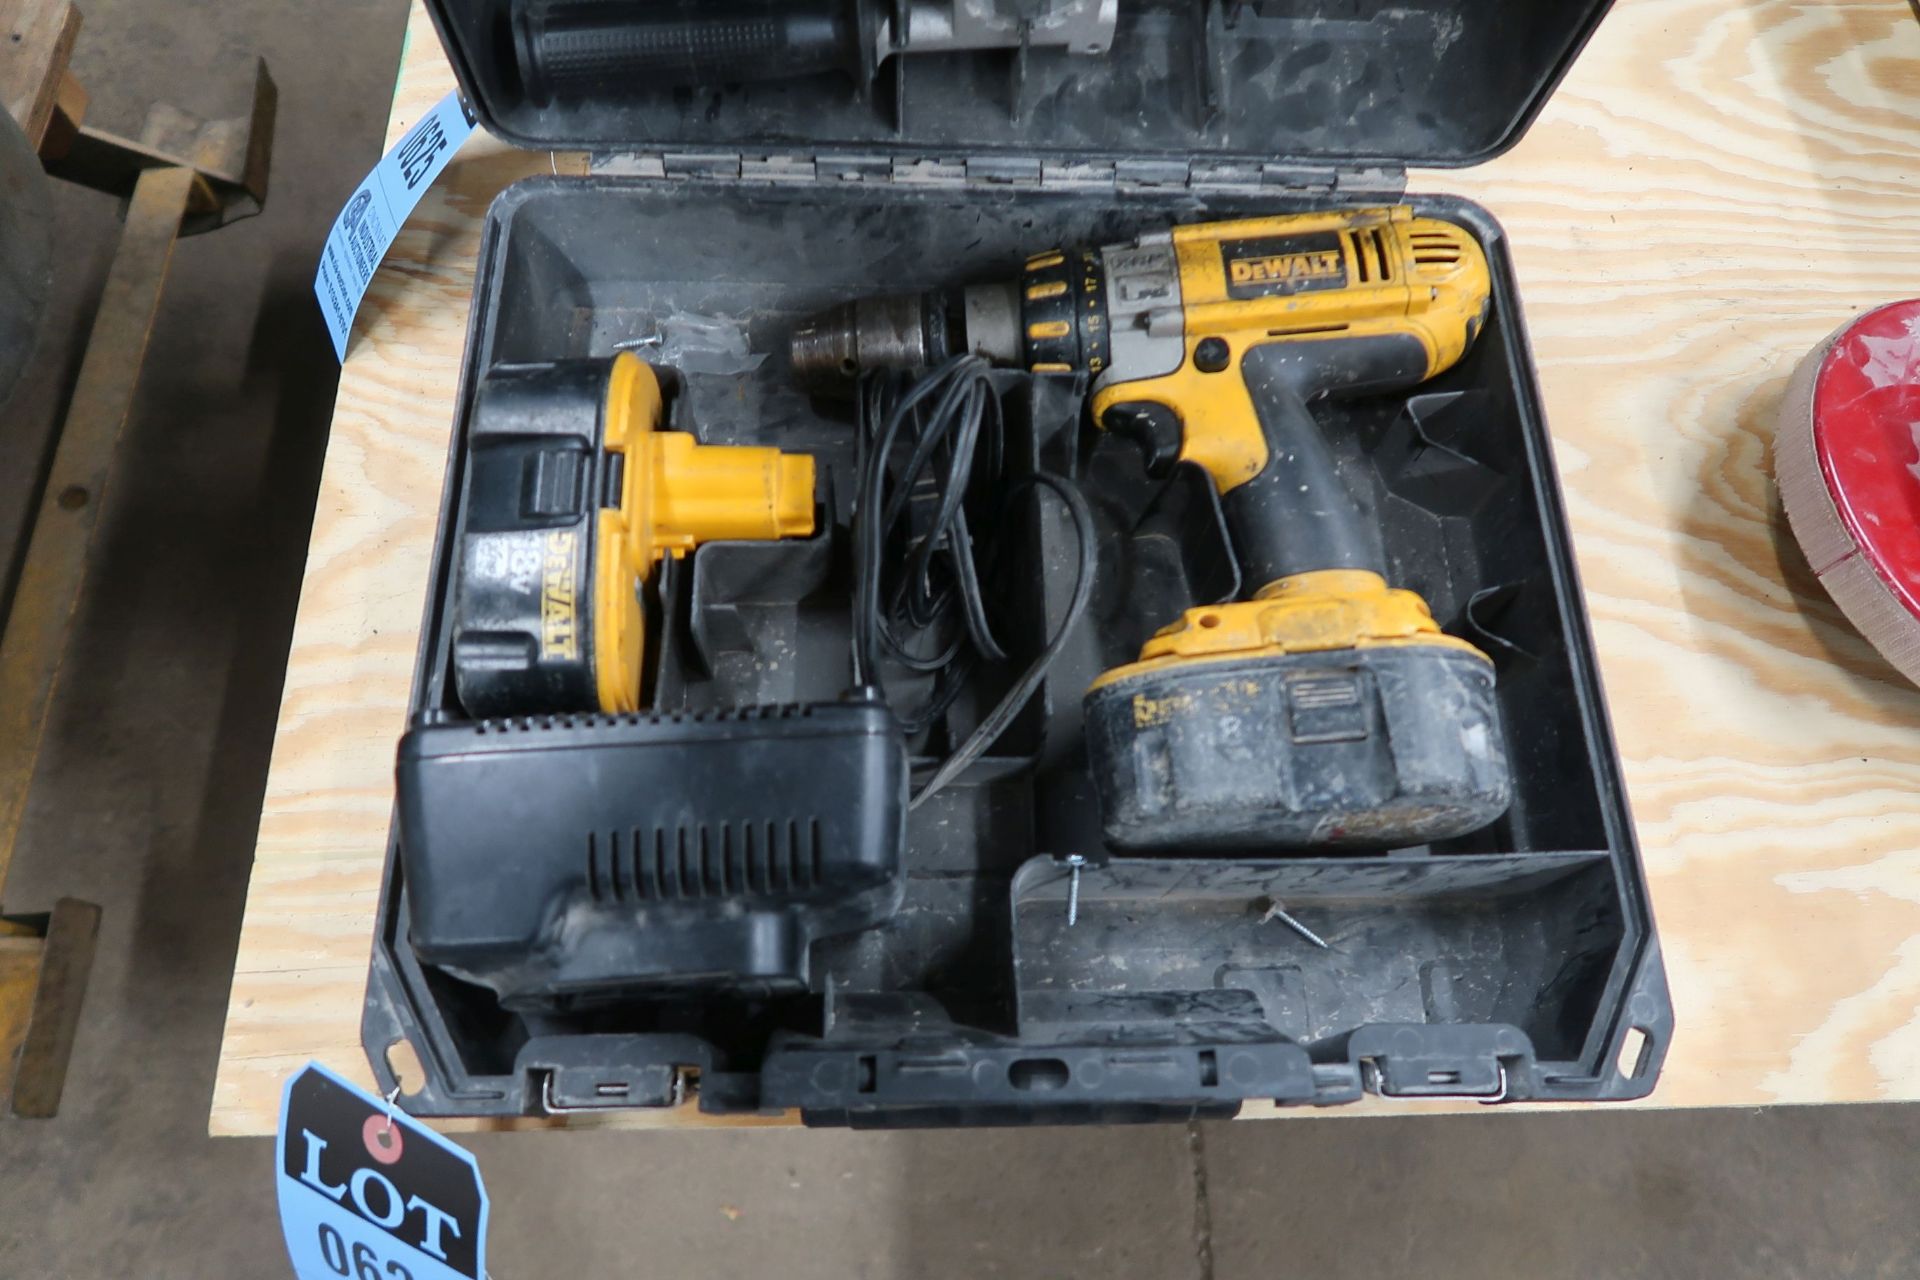 1/2" DEWALT CORDLESS DRILL WITH CHARGER